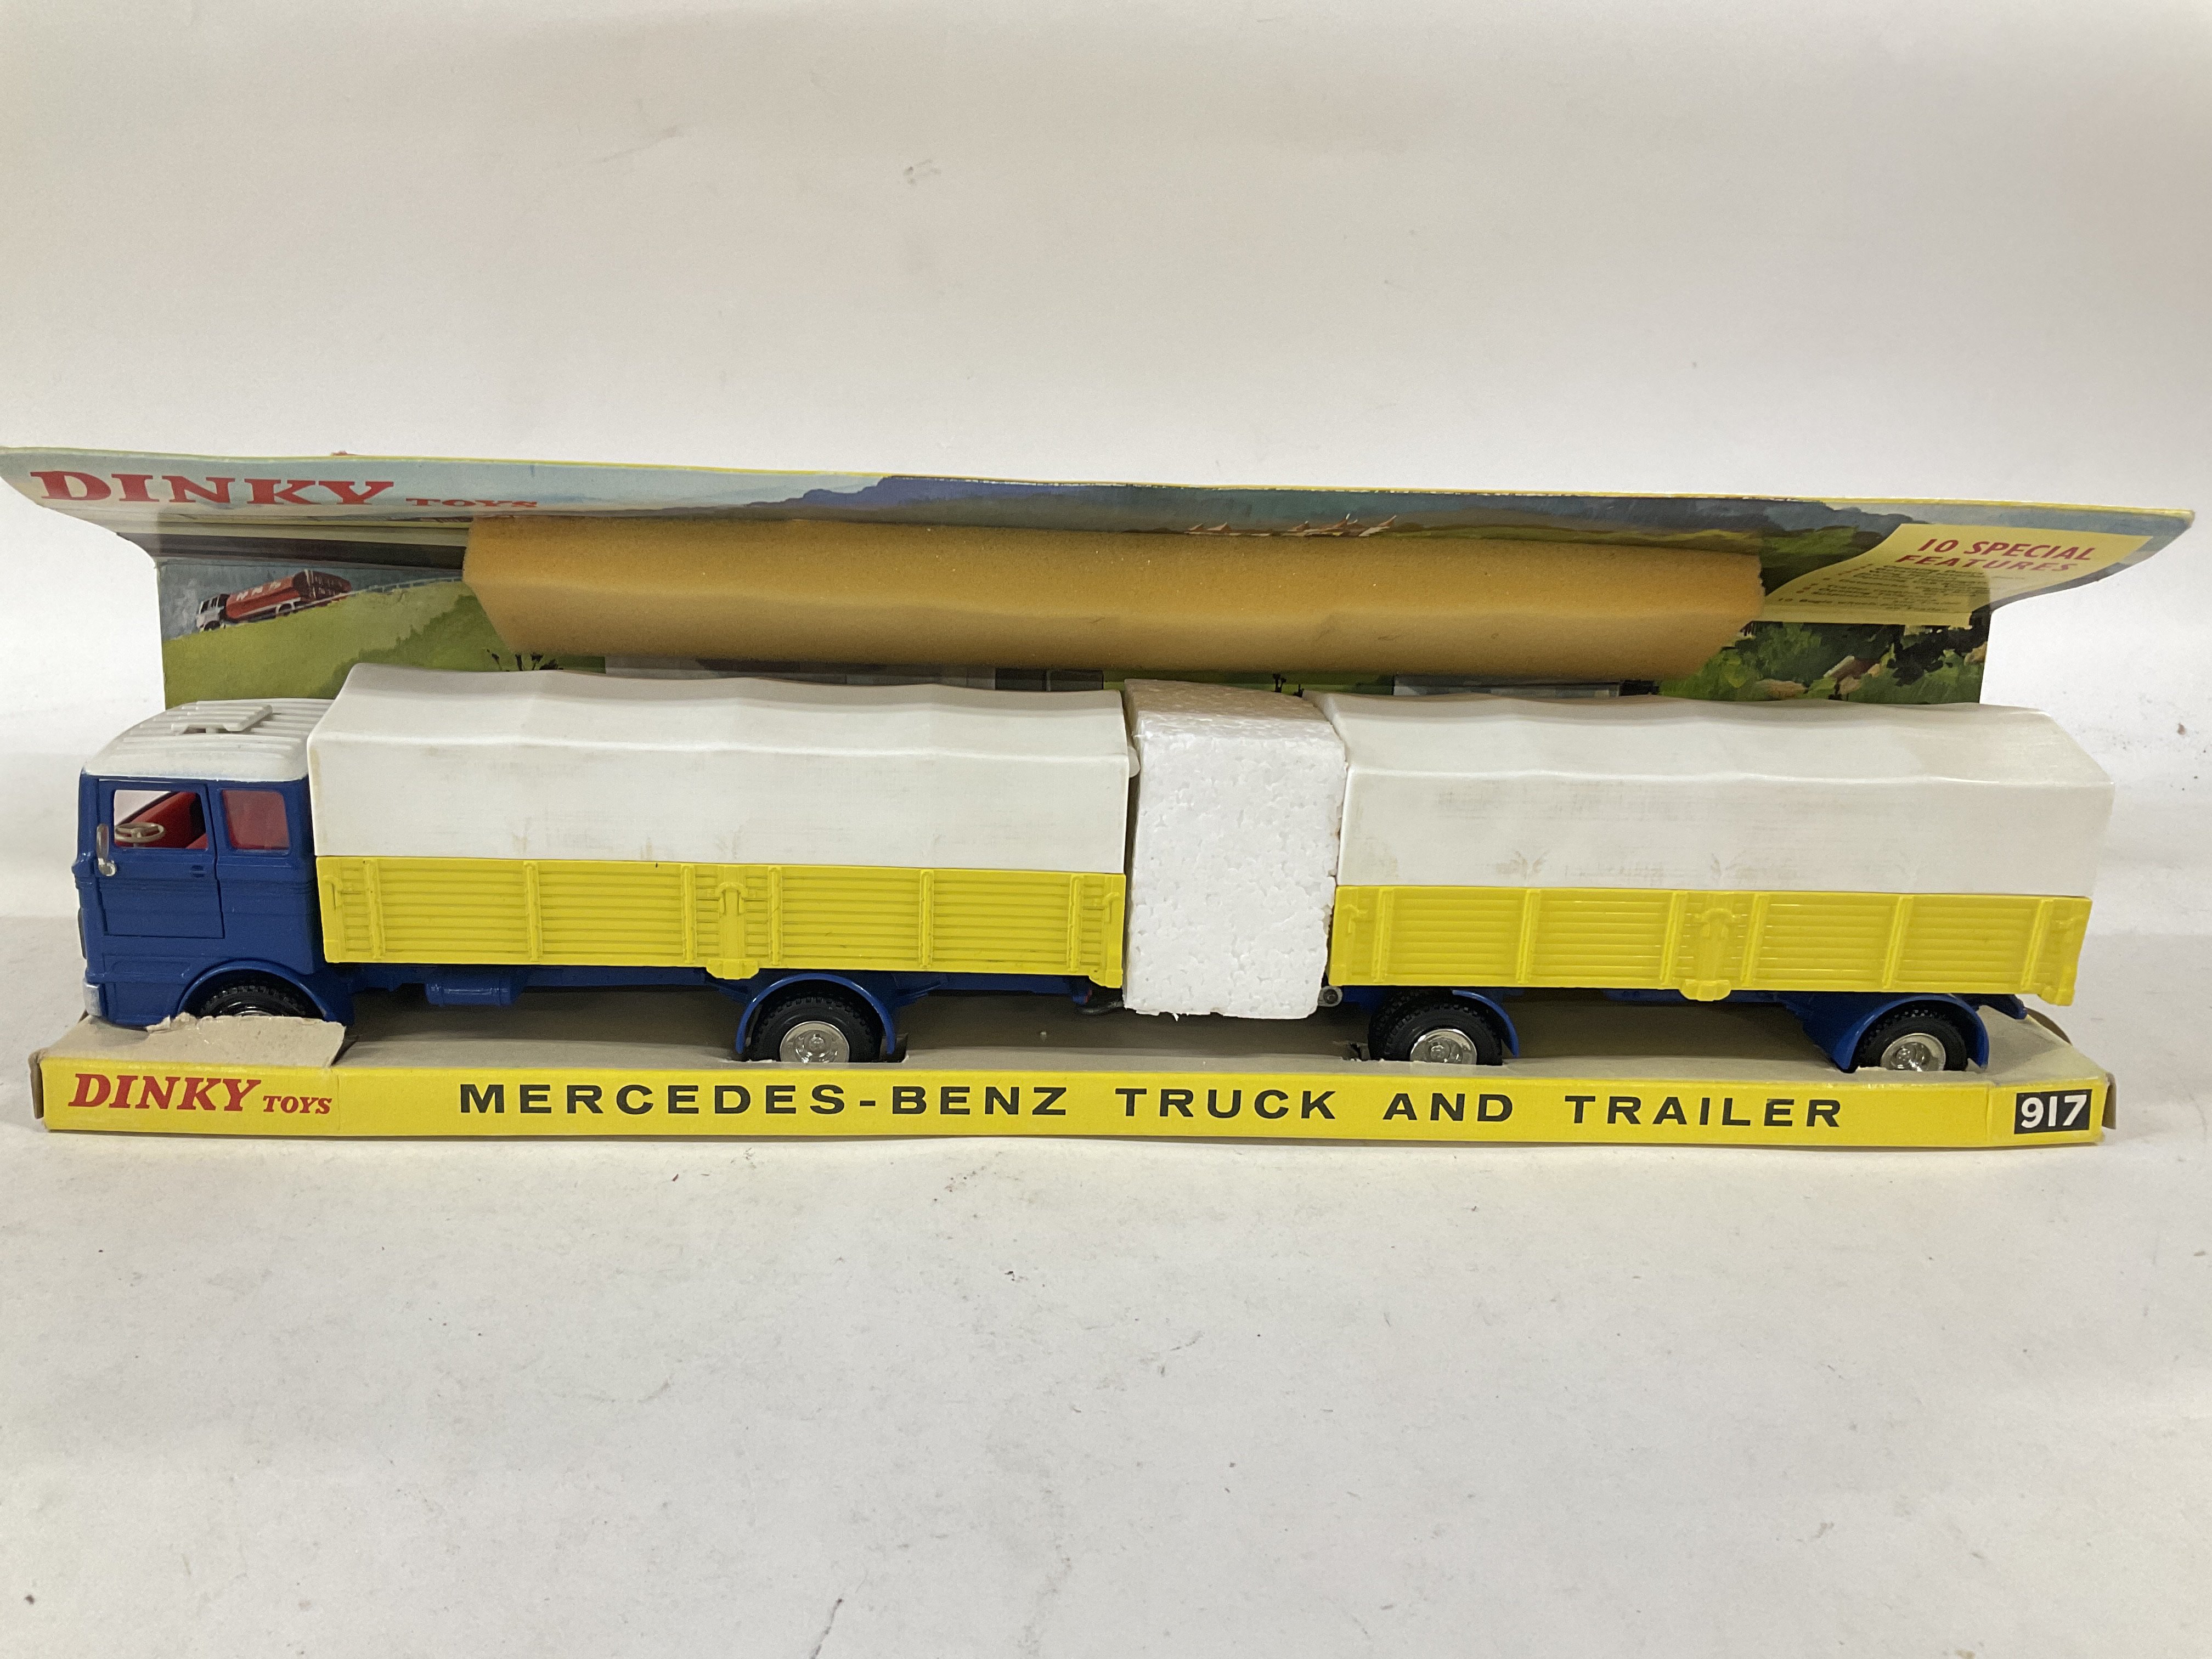 A Boxed Dinky Toys Mercedes-Benz Truck And Trailer #917. - Image 2 of 2